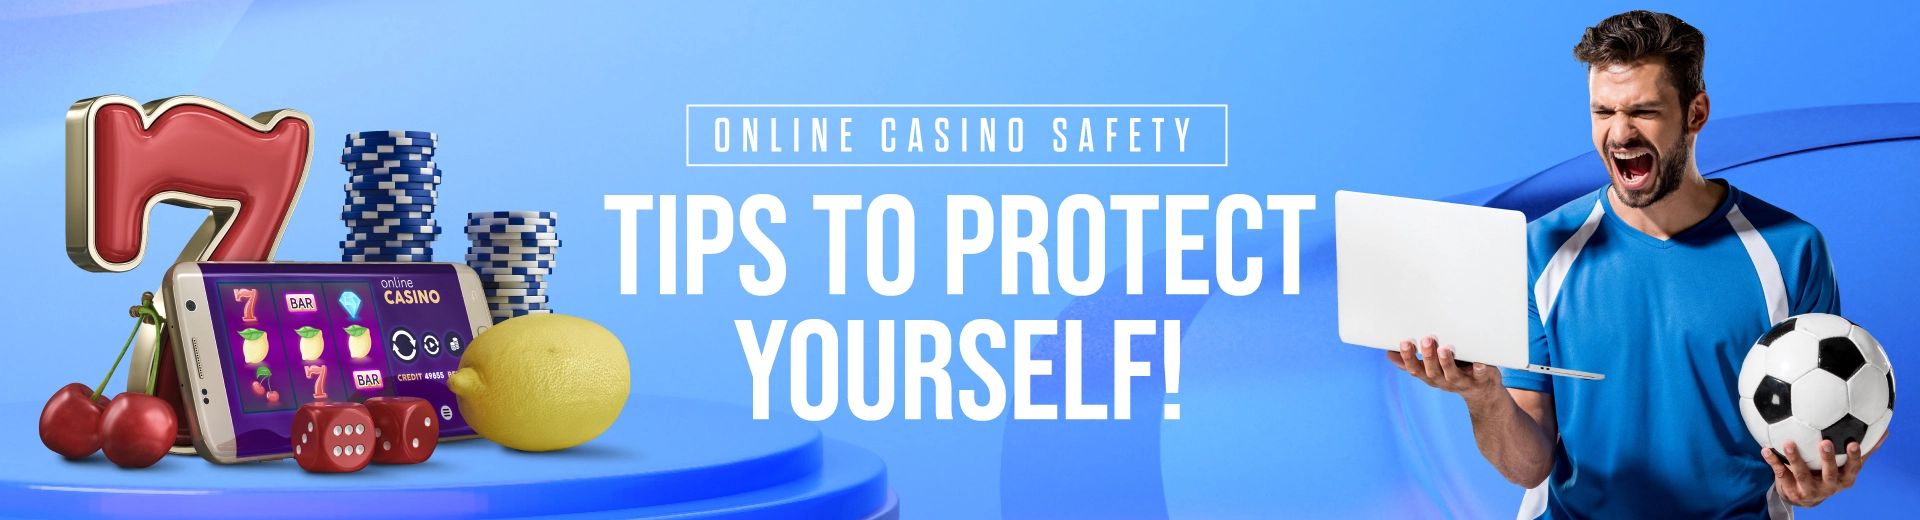 Online Casino Safety: Tips to Protect Yourself!